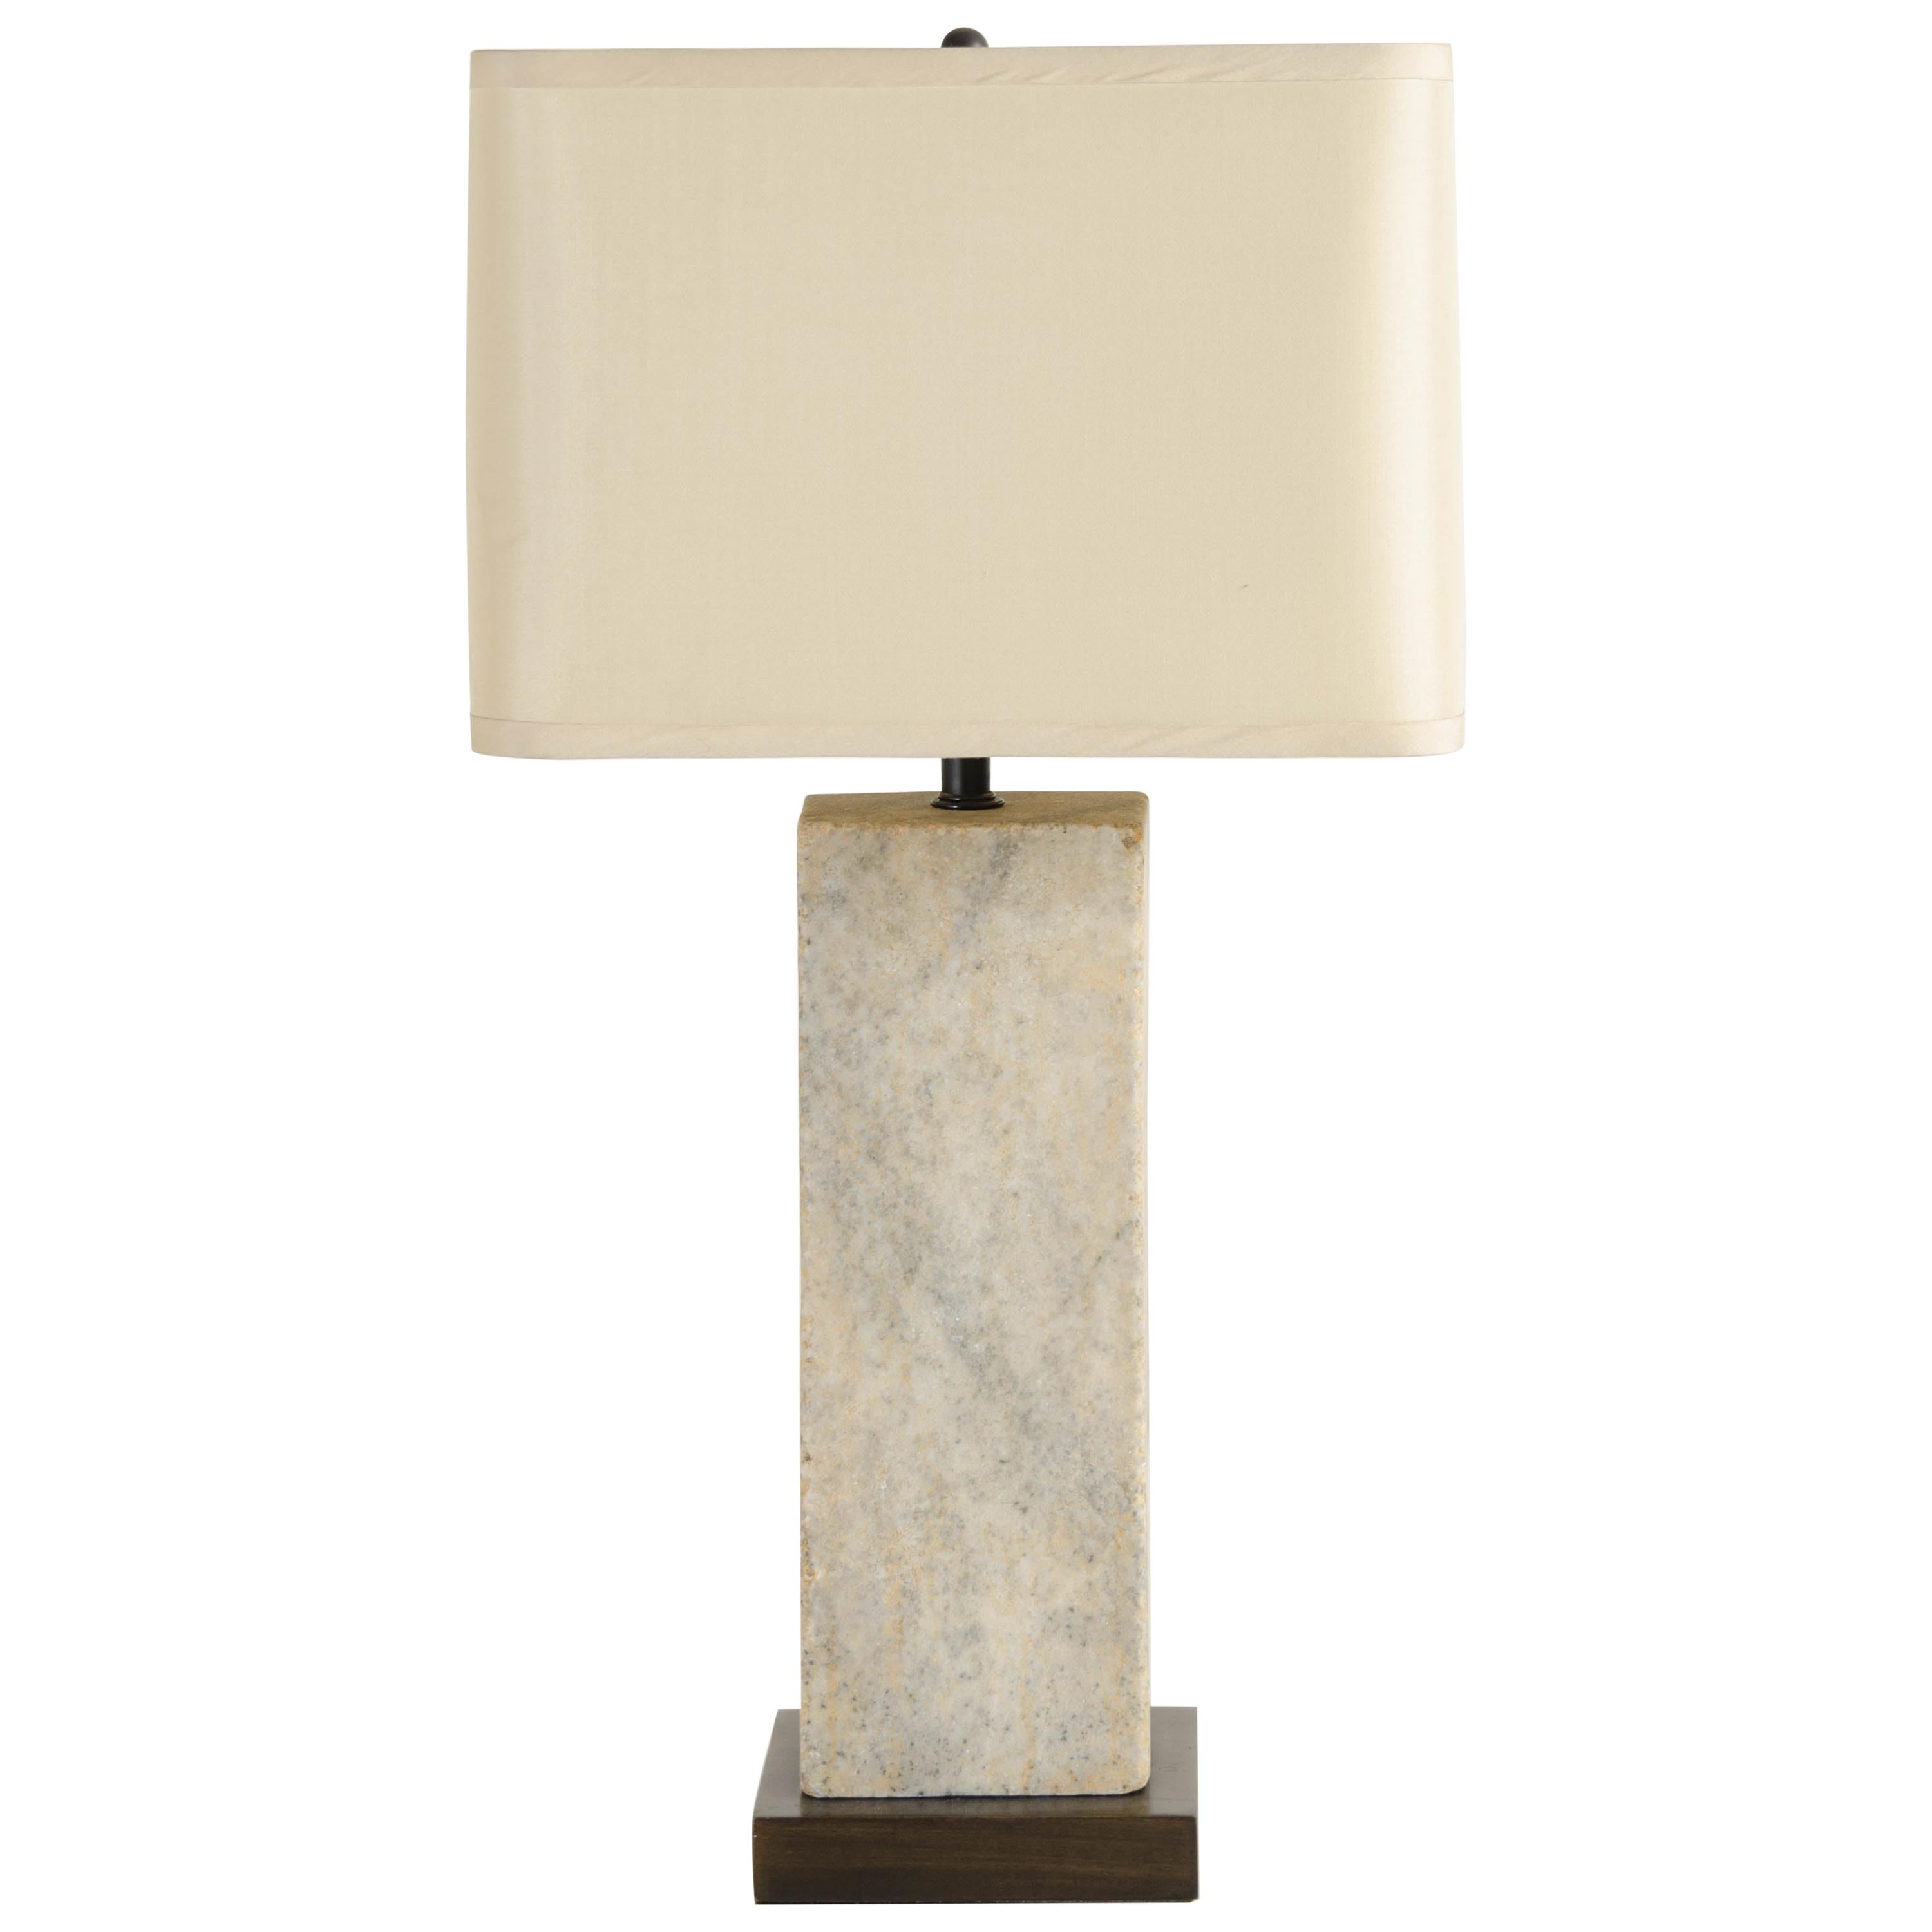 Vertical Stone Lamp with Shade by Robert Kuo, Hand Carved, Limited Edition